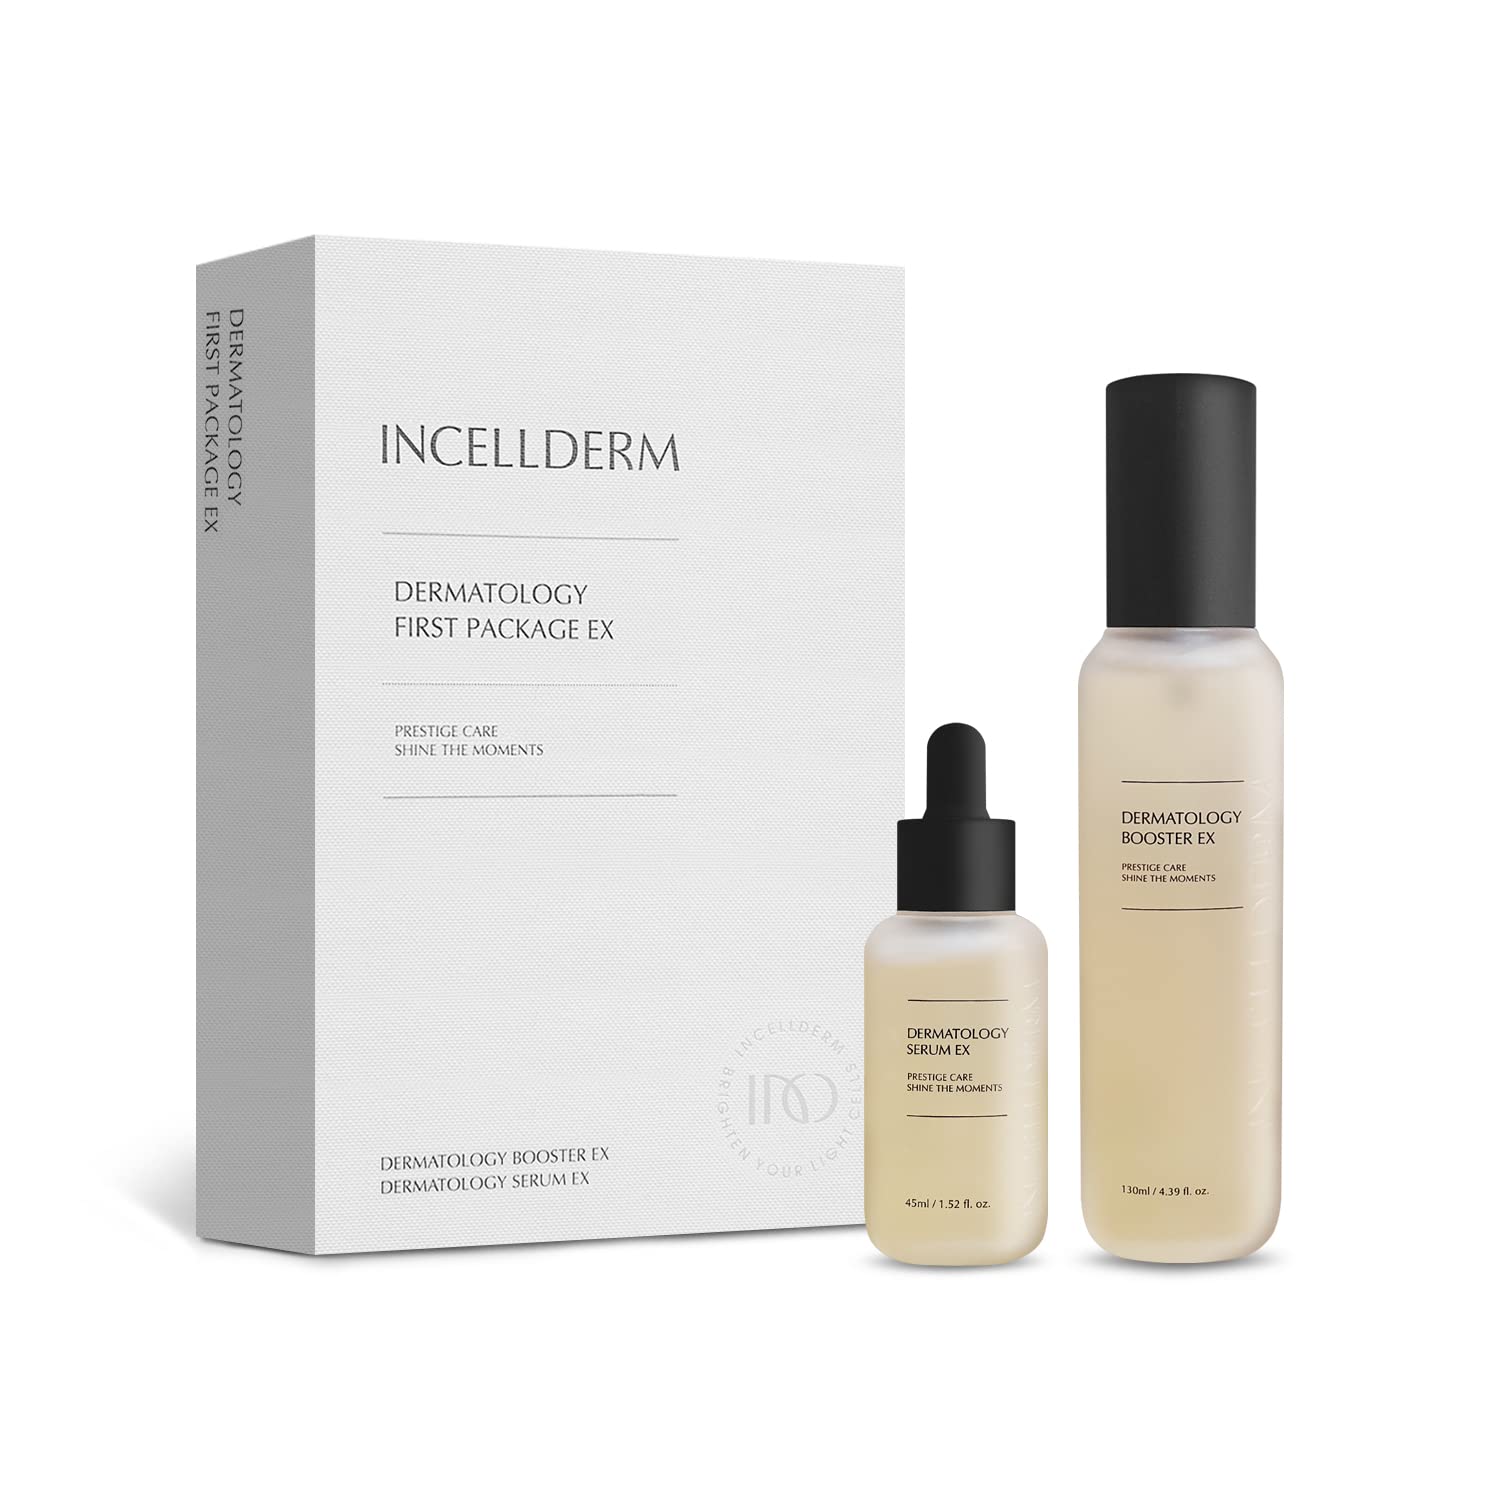 Incellderm Dermatology First Package: a comprehensive skincare set for all skin types, including cleanser, serum, moisturizer, and sunscreen.